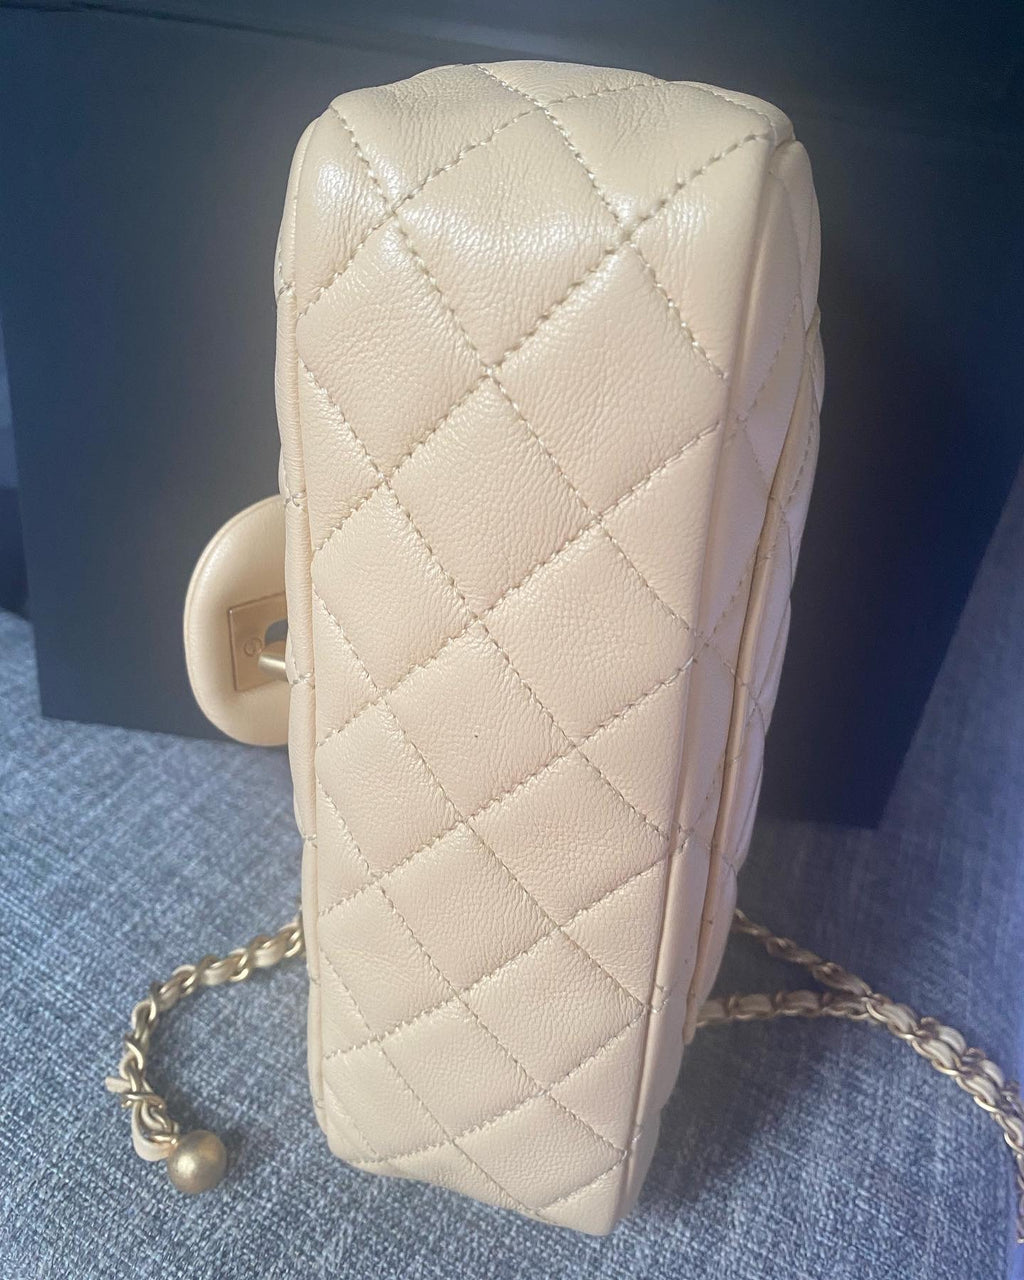 Chanel Blue Quilted Denim Pearl Crush Mini Classic Flap Bag Brushed Gold Hardware, 2021 (Like New)